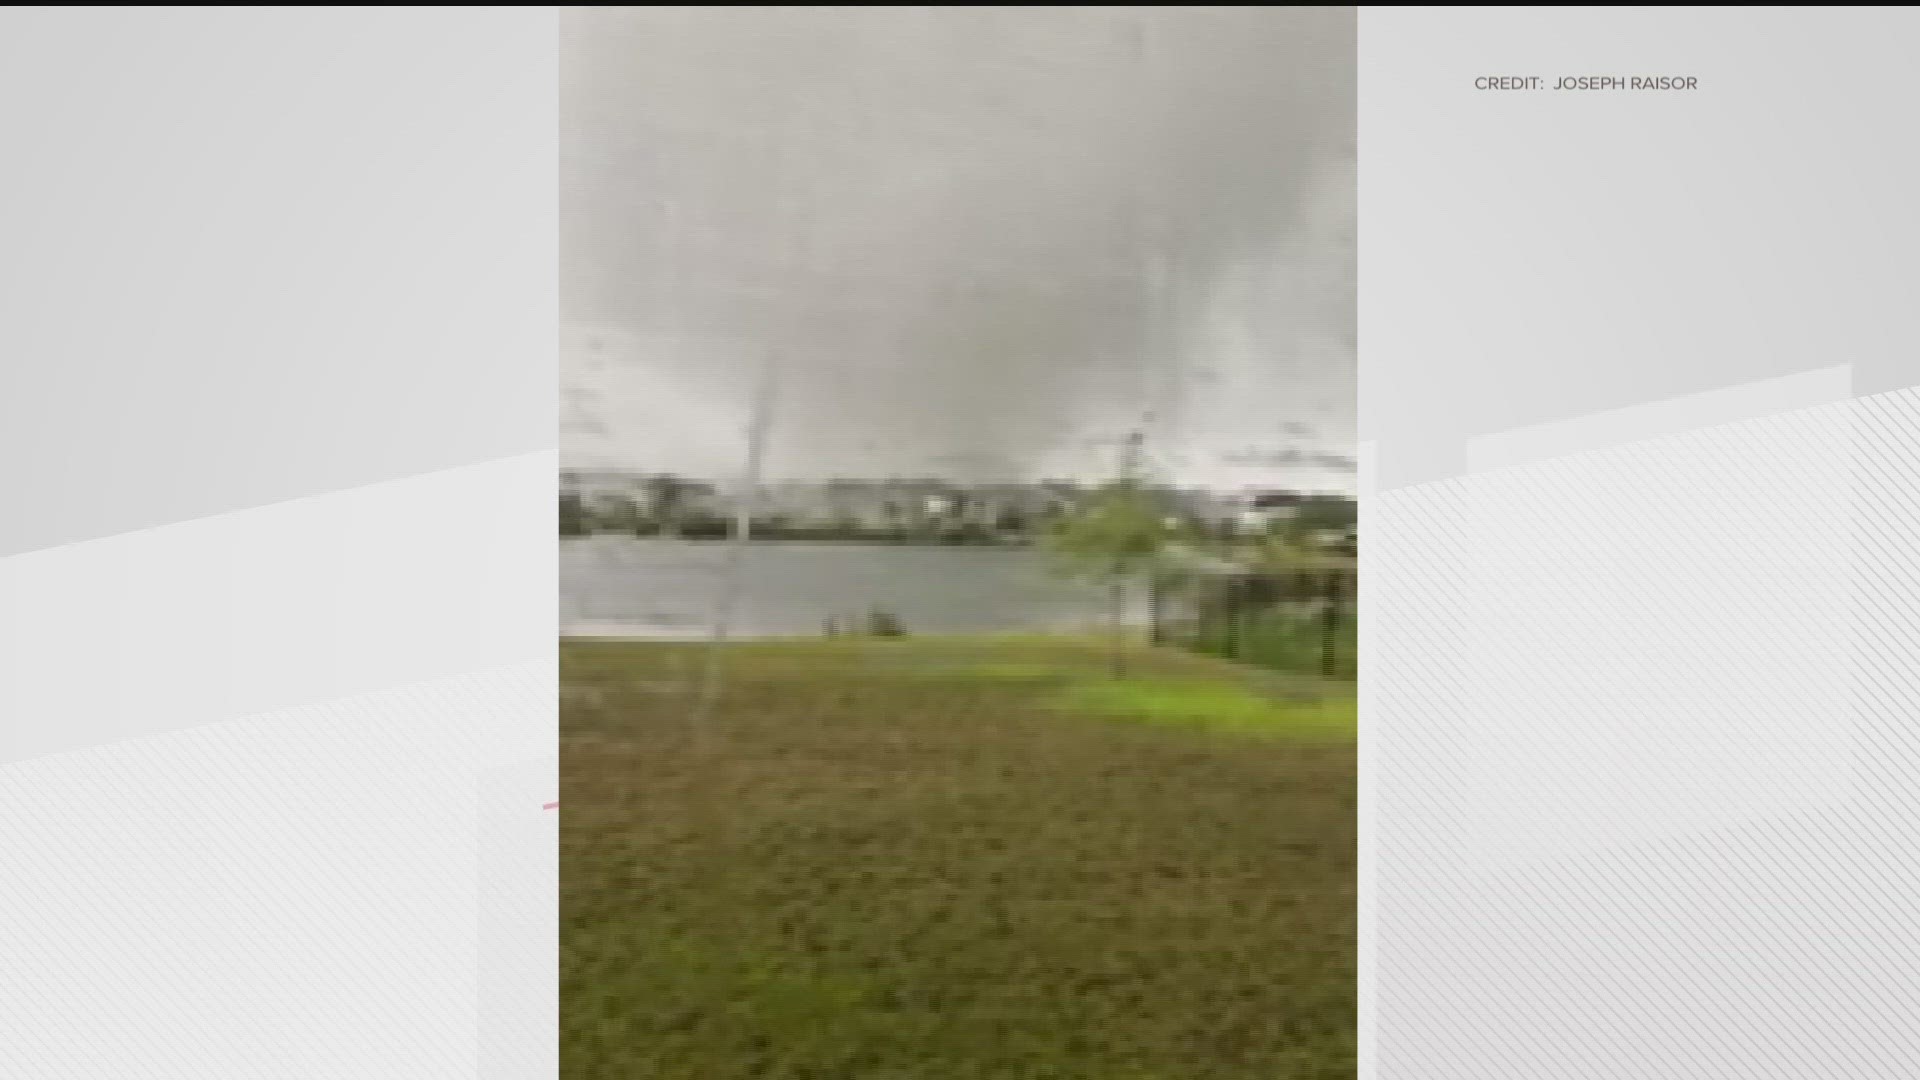 Here's a look at the tornado from Saint John's County, where a tornado was confirmed Thursday afternoon.